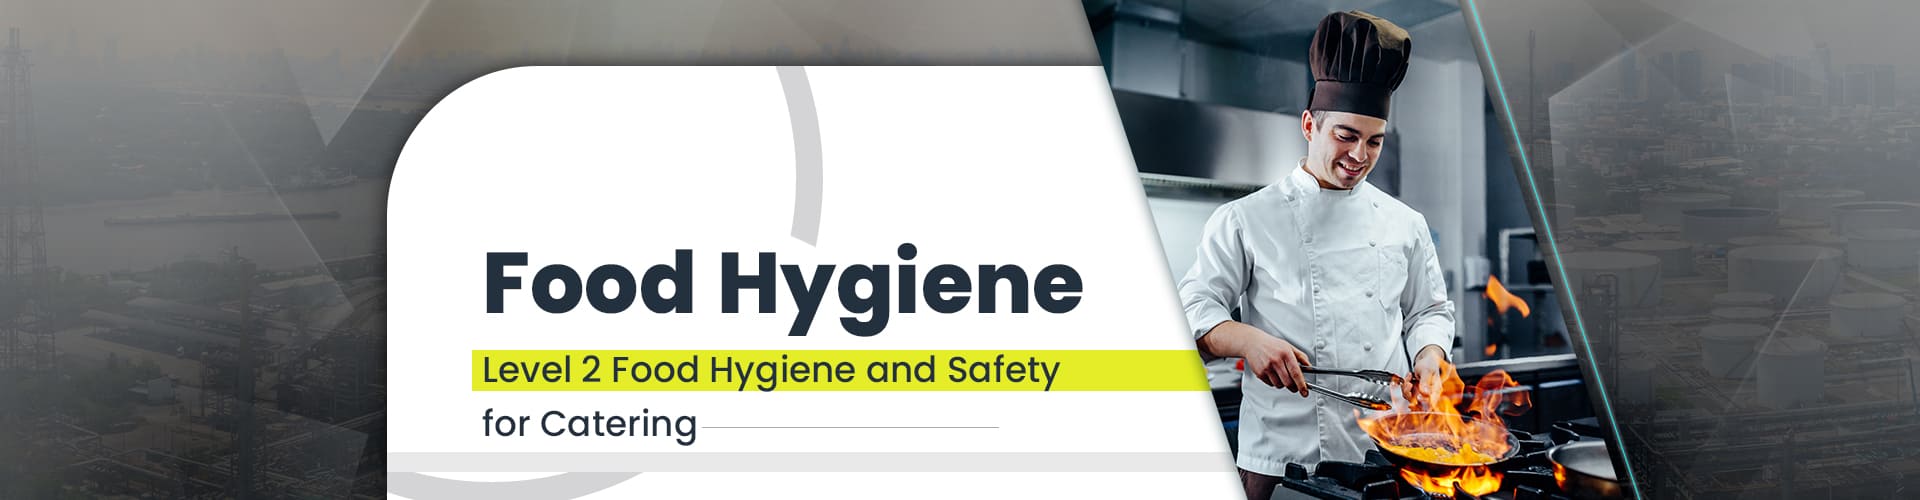 Food Safety & Hygiene Level 2 Course For Catering